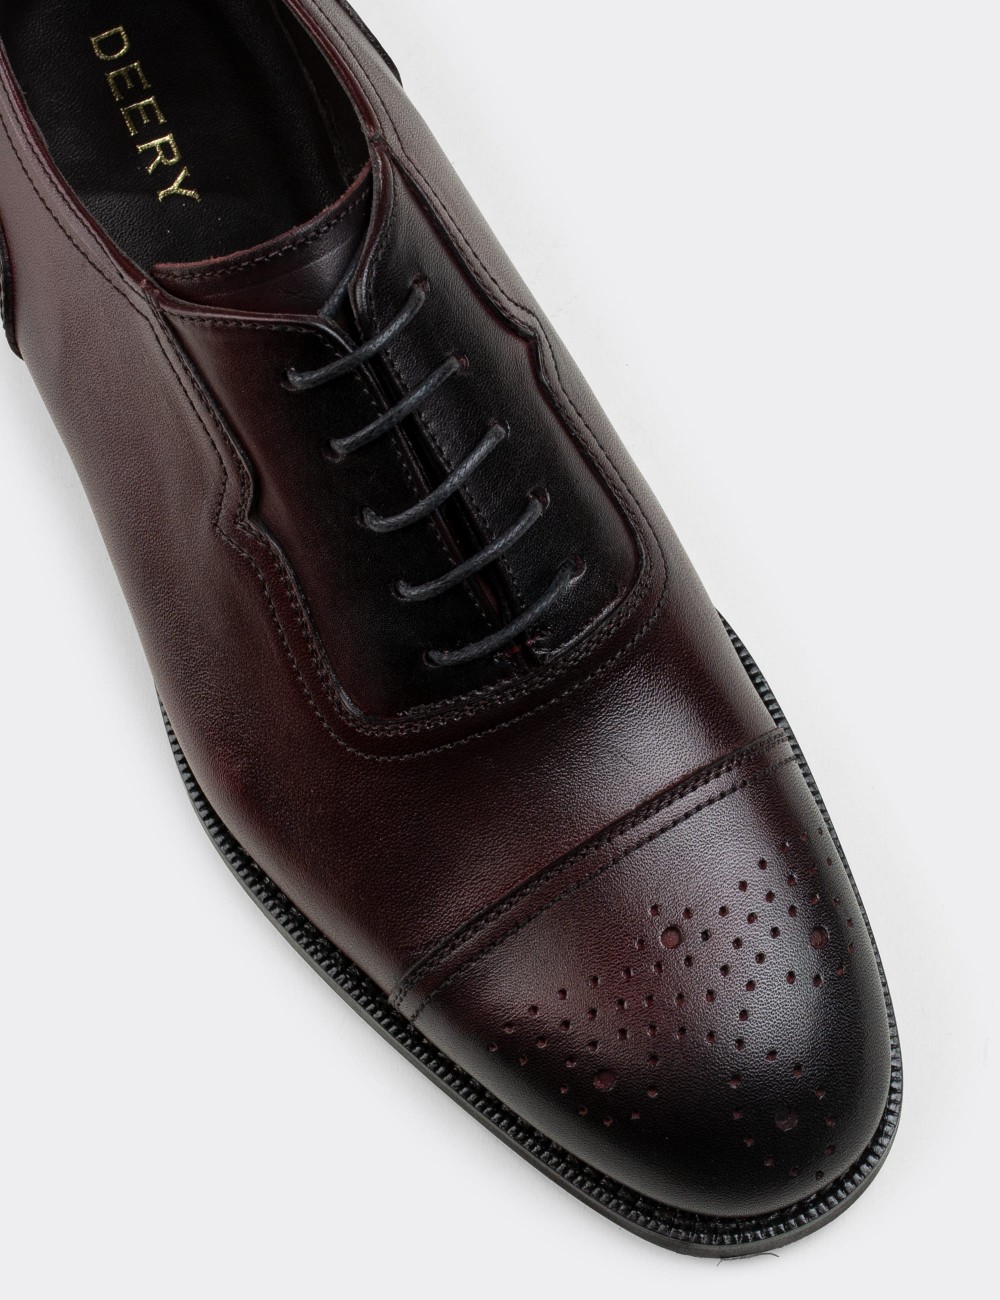 Burgundy  Leather Classic Shoes - 01687MBRDM01